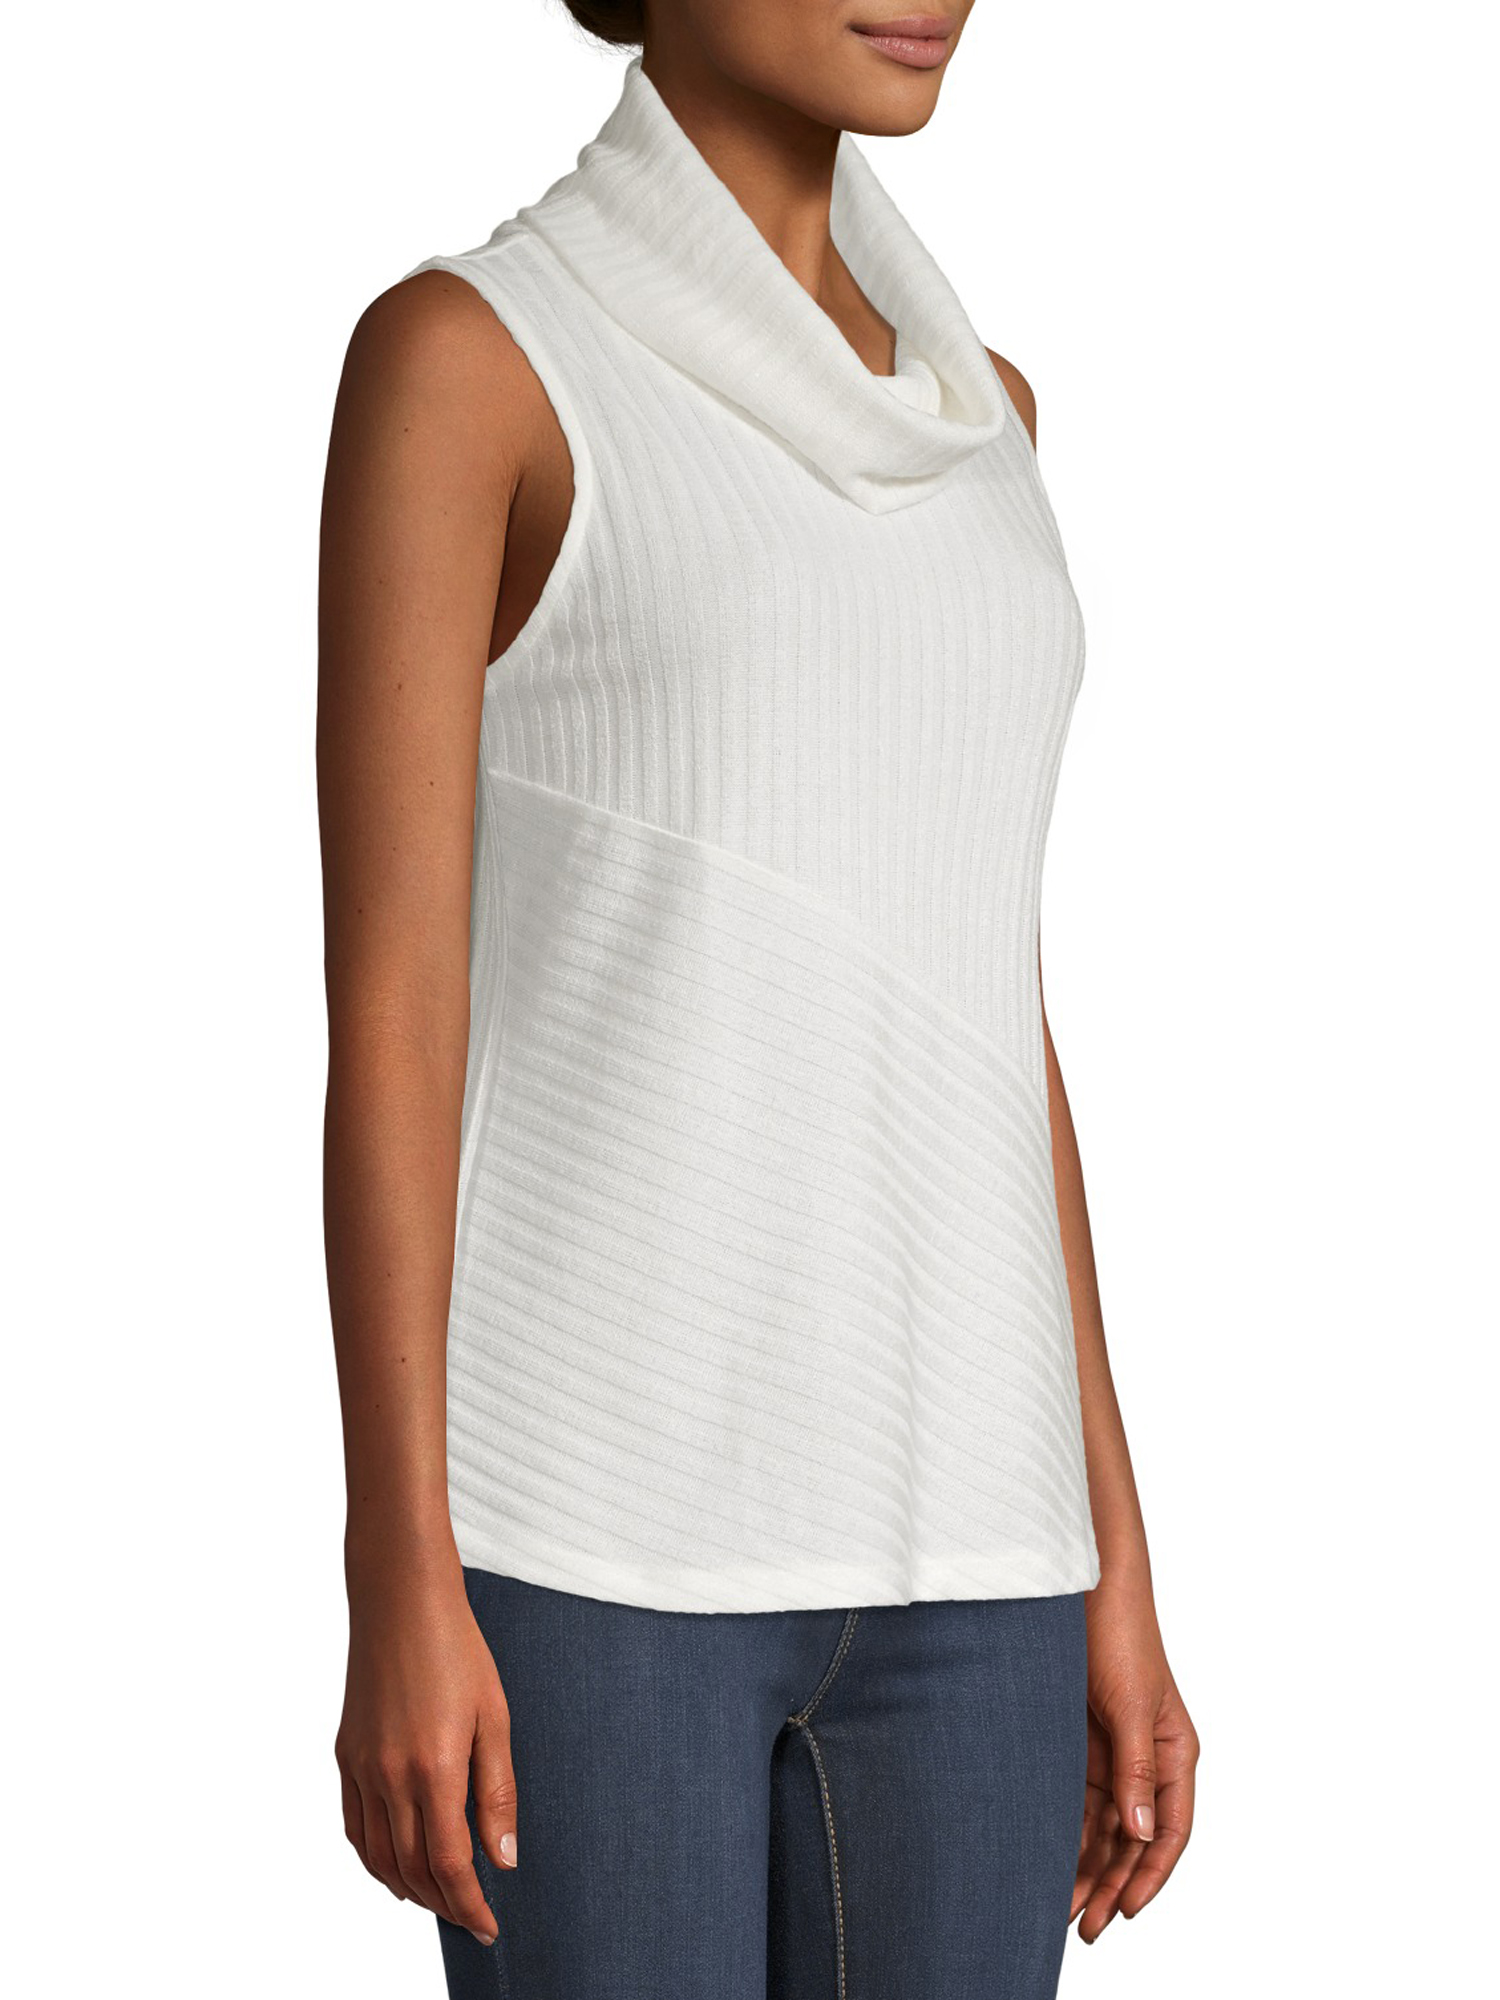 Time and Tru Women's Sleeveless Turtleneck Sweater - image 3 of 5